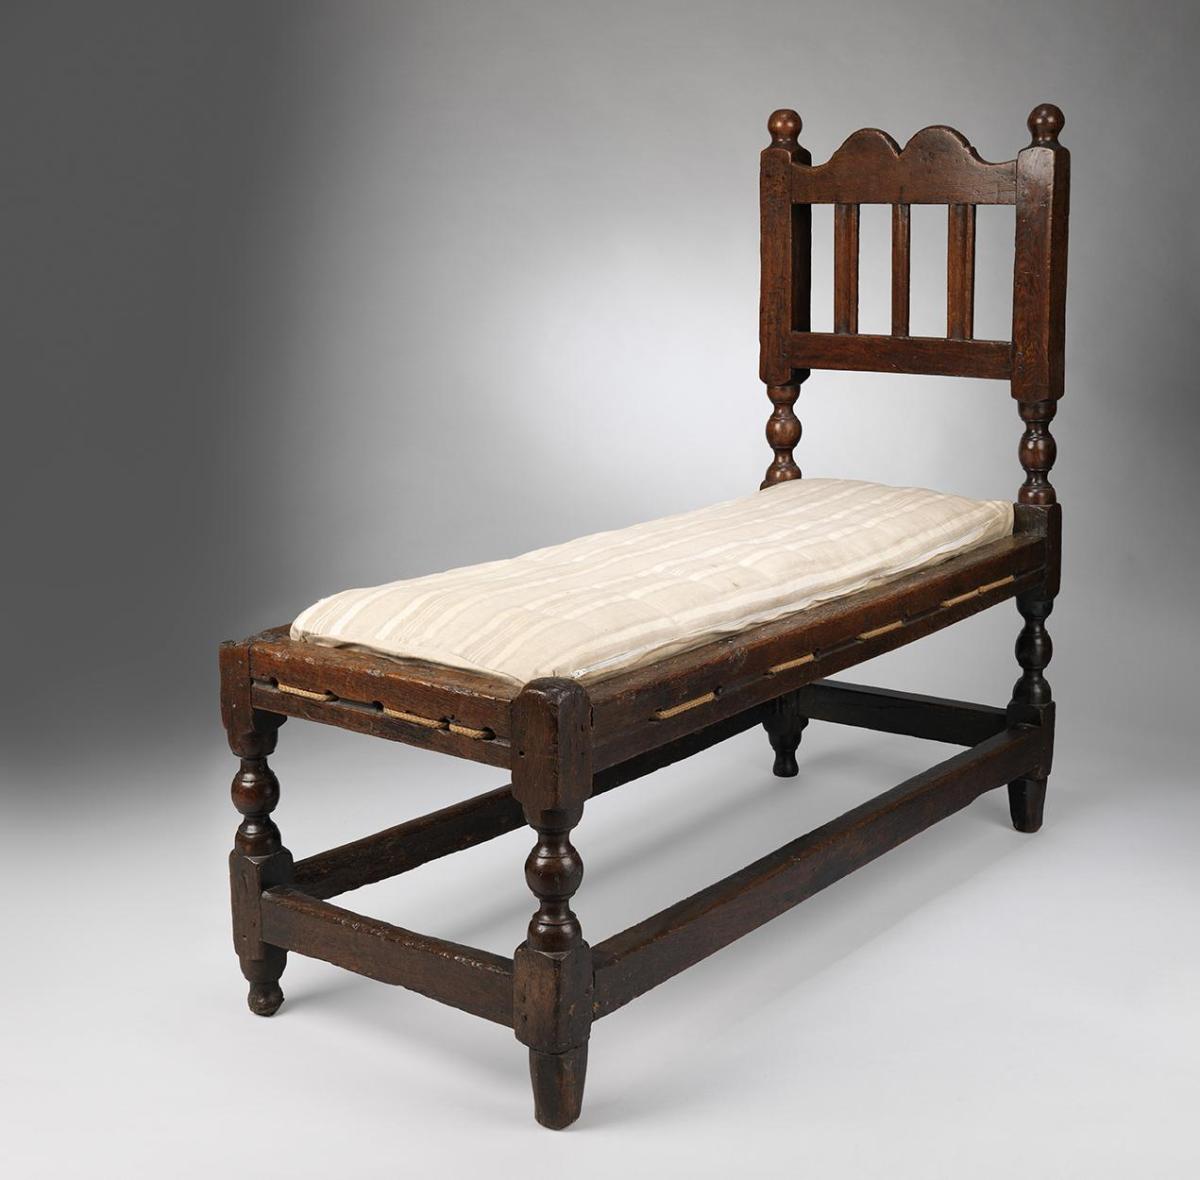 Rare Small William and Mary Period Joined Frame Day Bed The Graphic Ogee Cresting Flanked by Ball Finials and Raised on Turned Legs Solid Naturally Patinated Oak English, c.1680